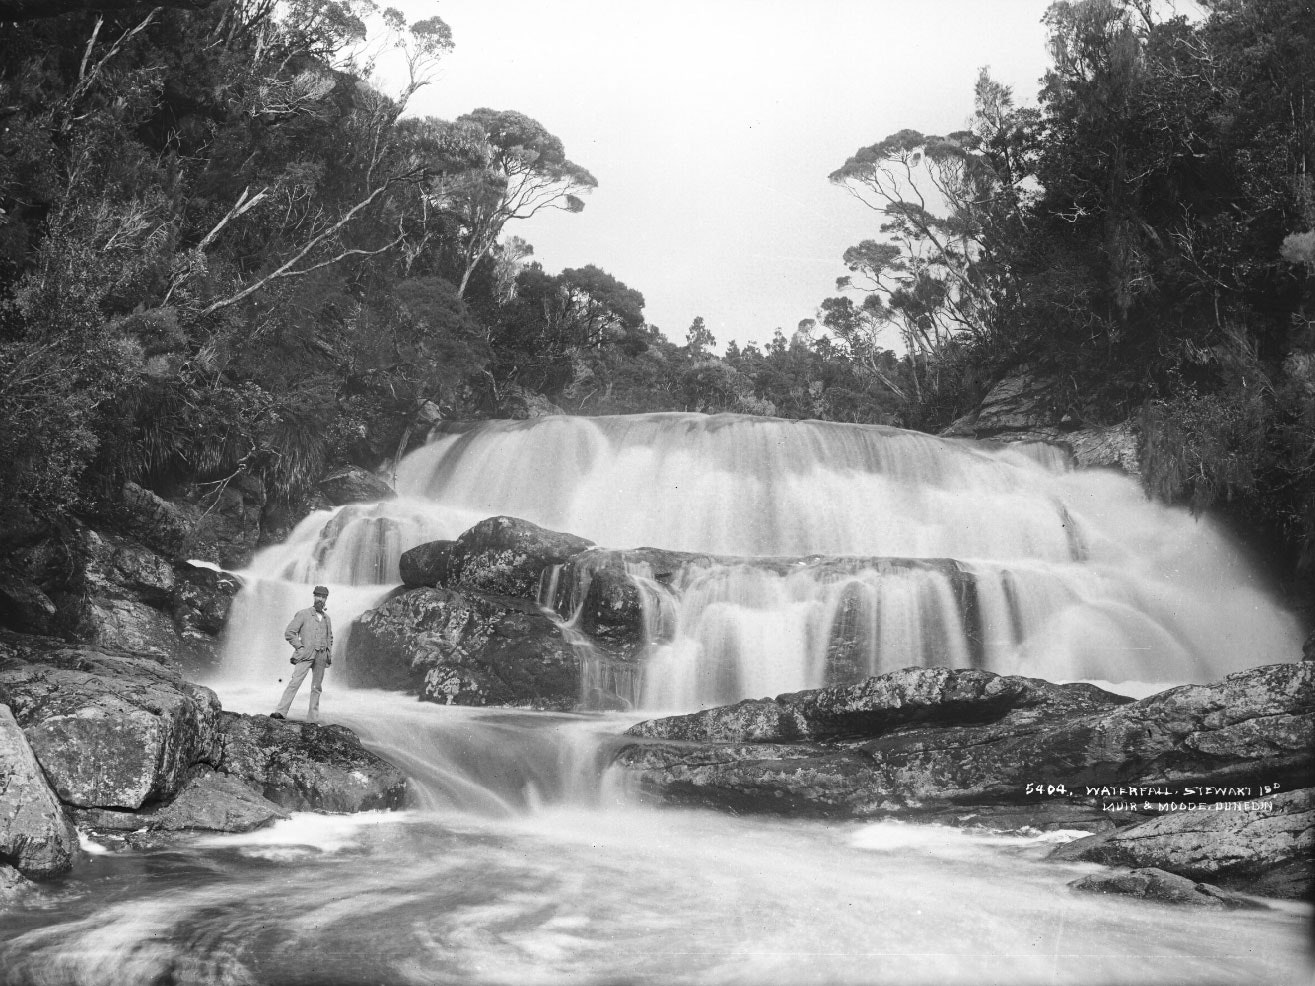 Black and white photo of a man standing in front of a large waterfall